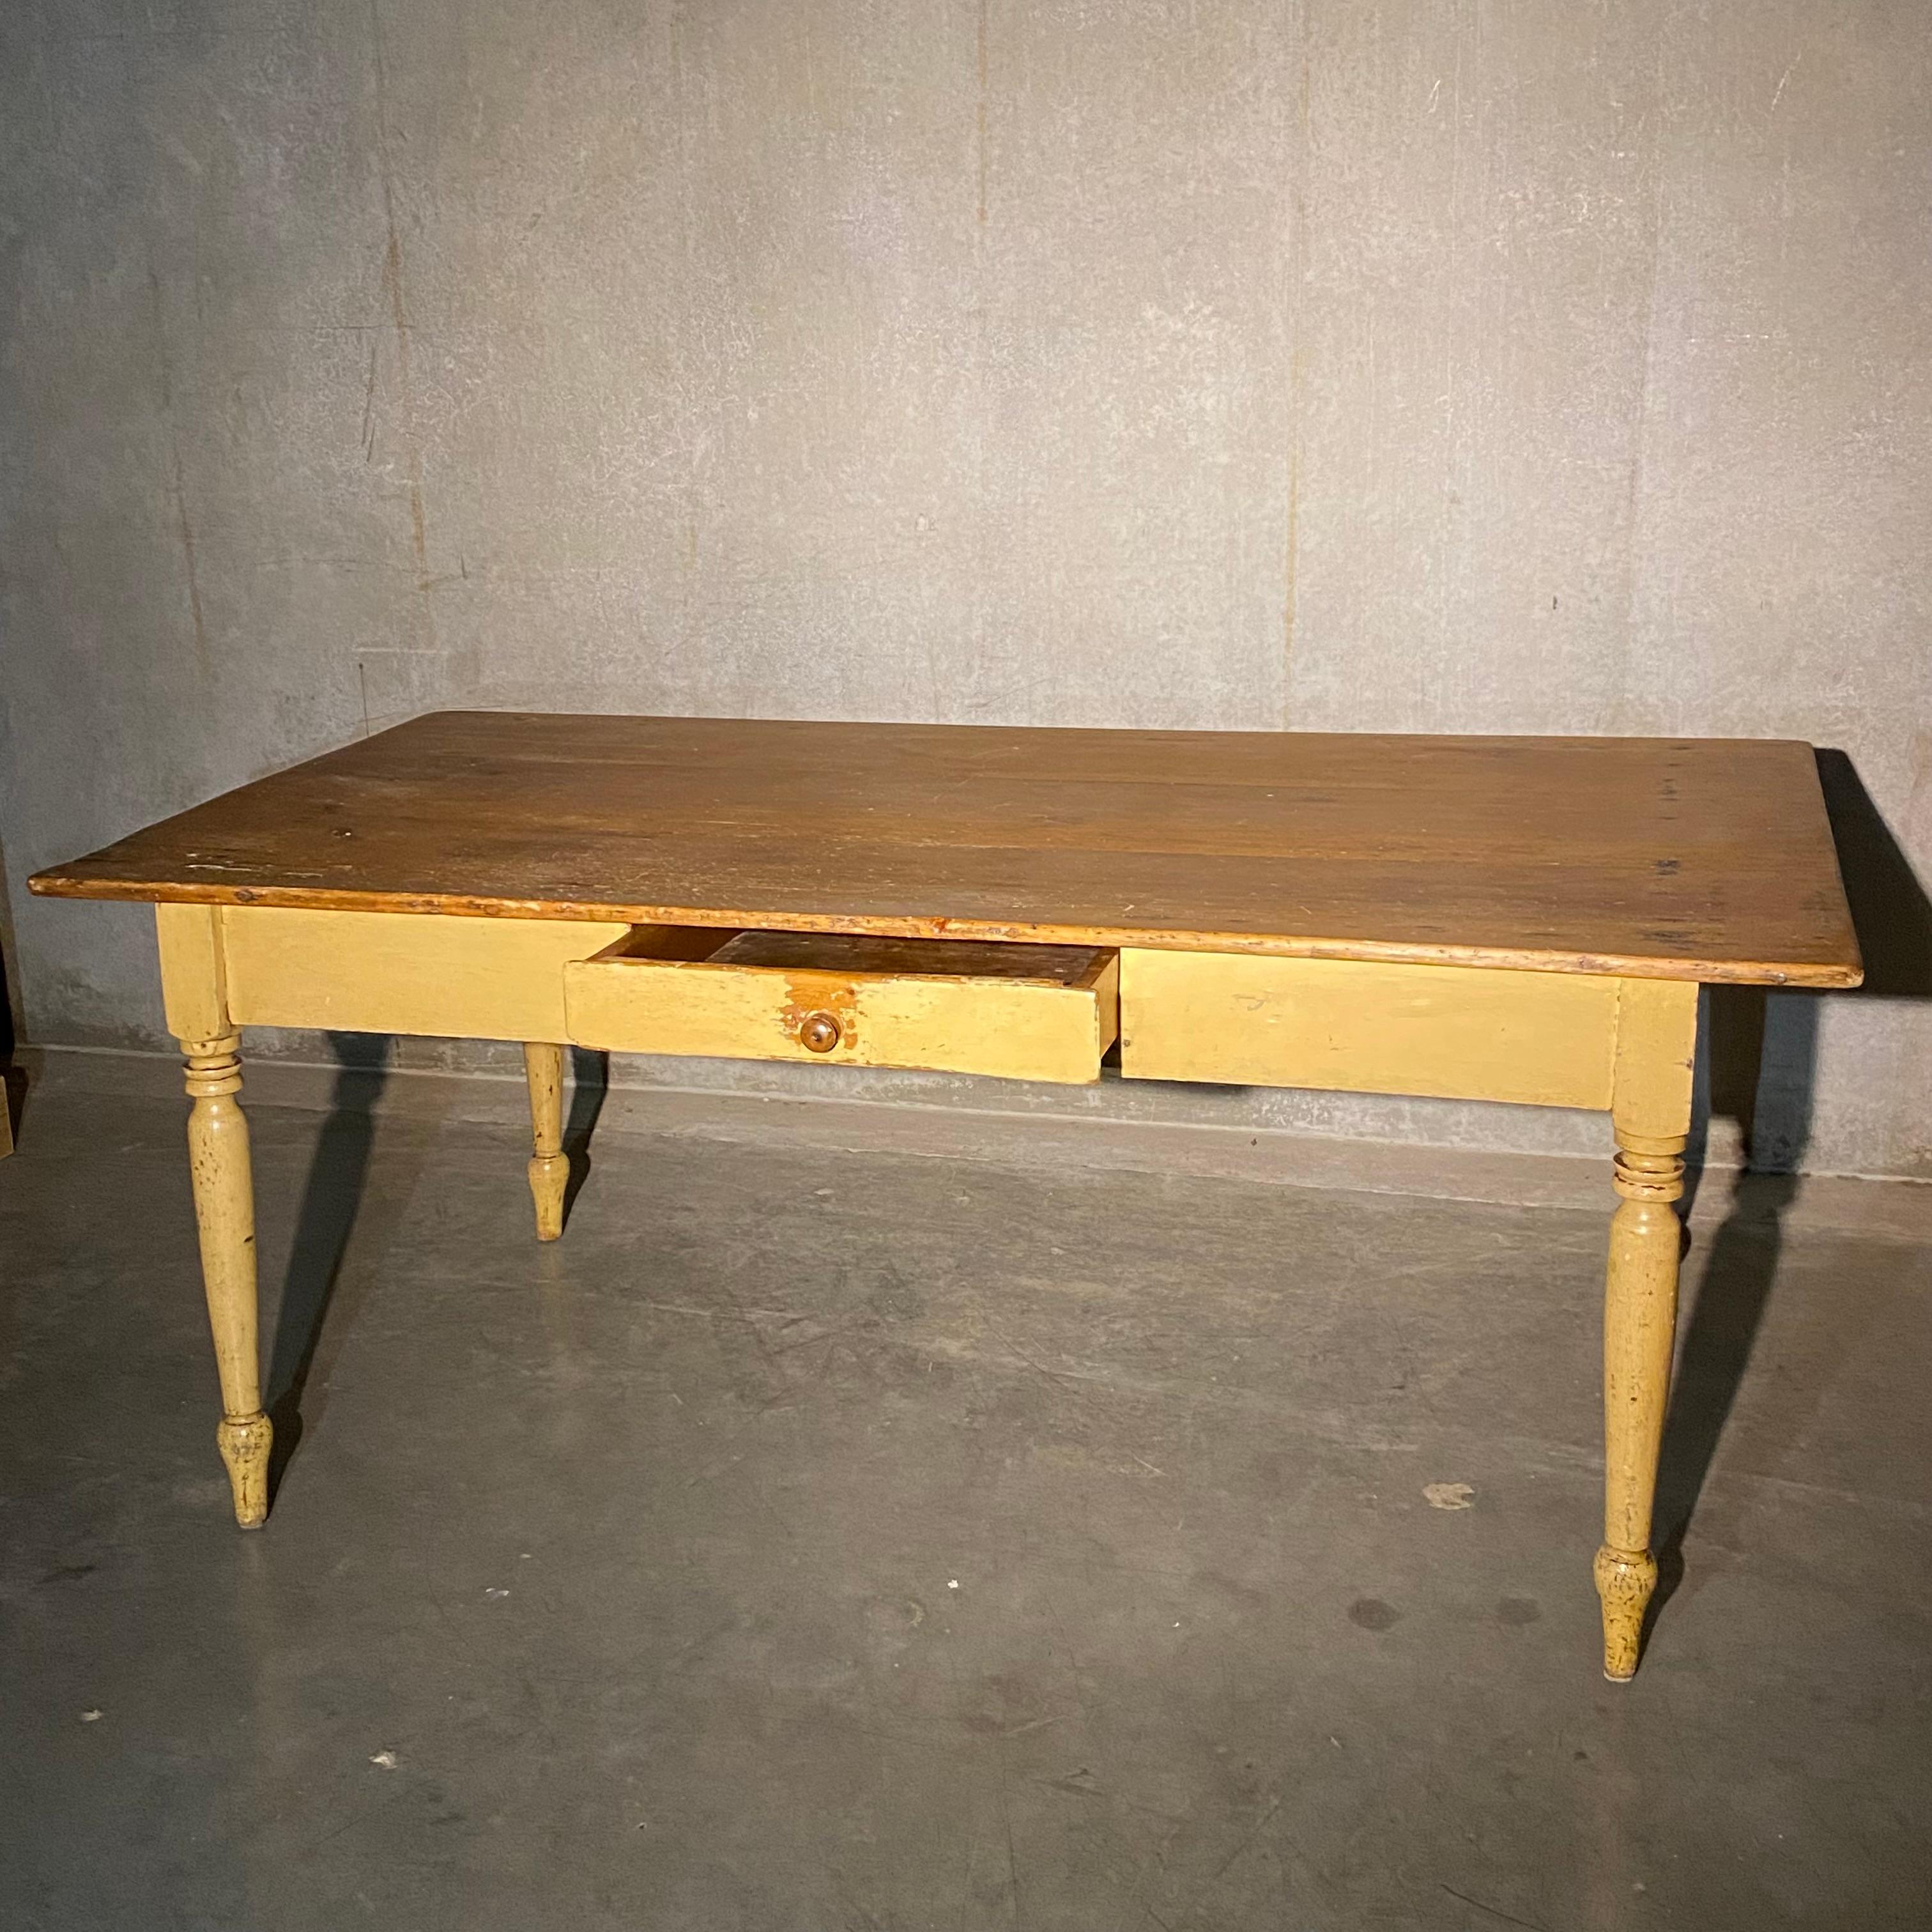 An exceptional farm table with nice three board pine top, set of a turned leg base in old age cracked polychrome painted finish. This table is as found, with a working drawer extra wide top and beautiful old painted base.

Found in Central Quebec